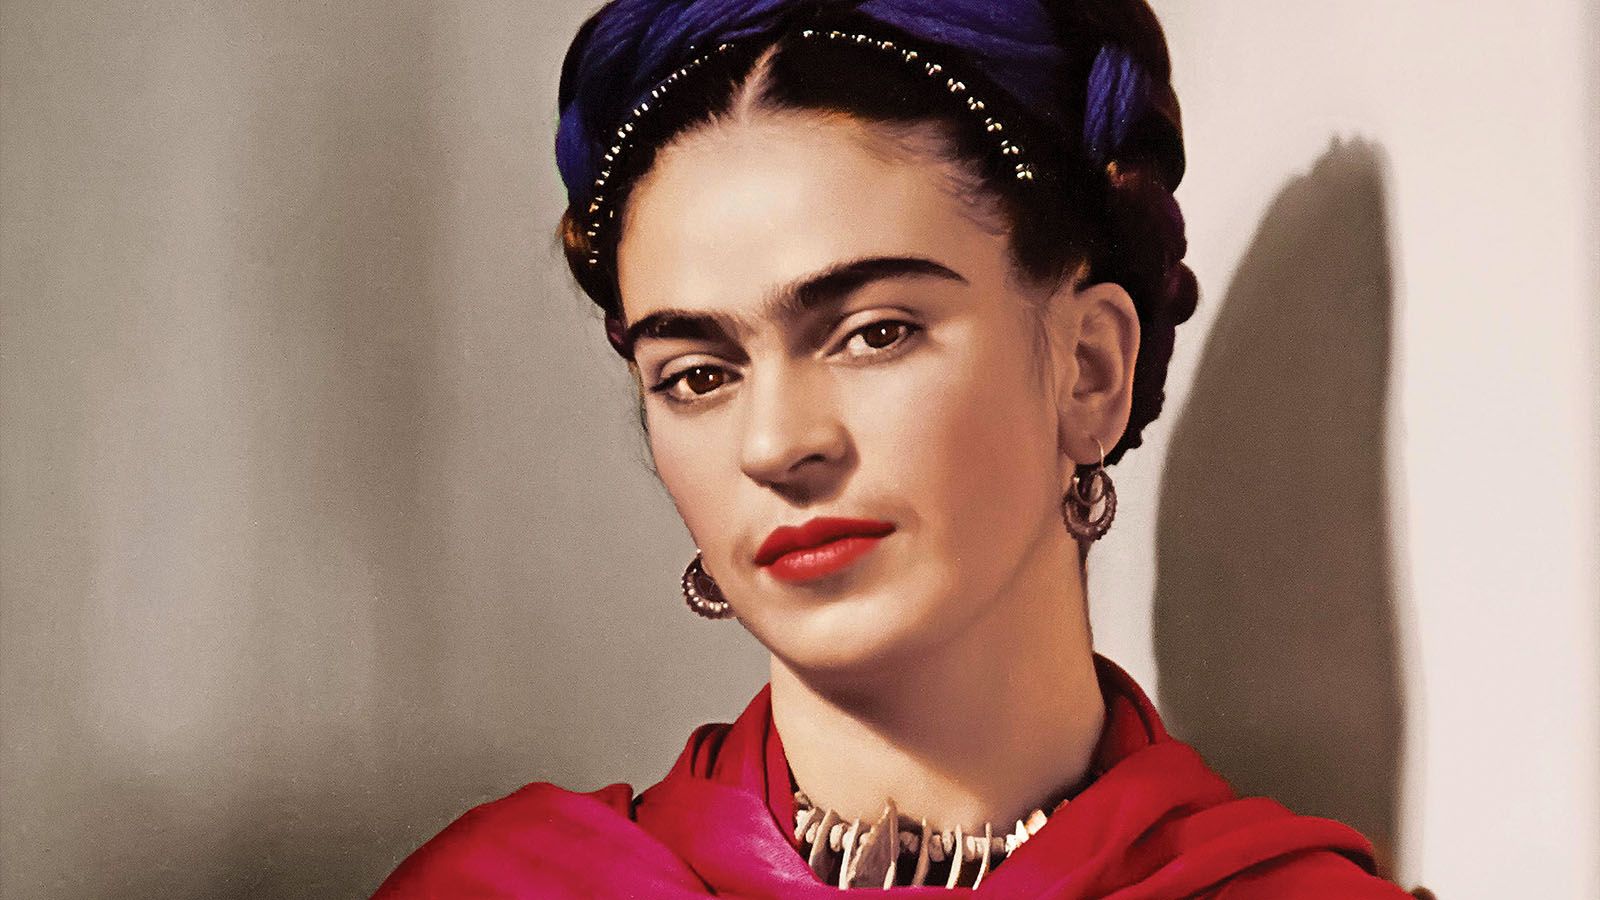 The downtown Allen County Public Library will host a Frida event on Sept. 17.